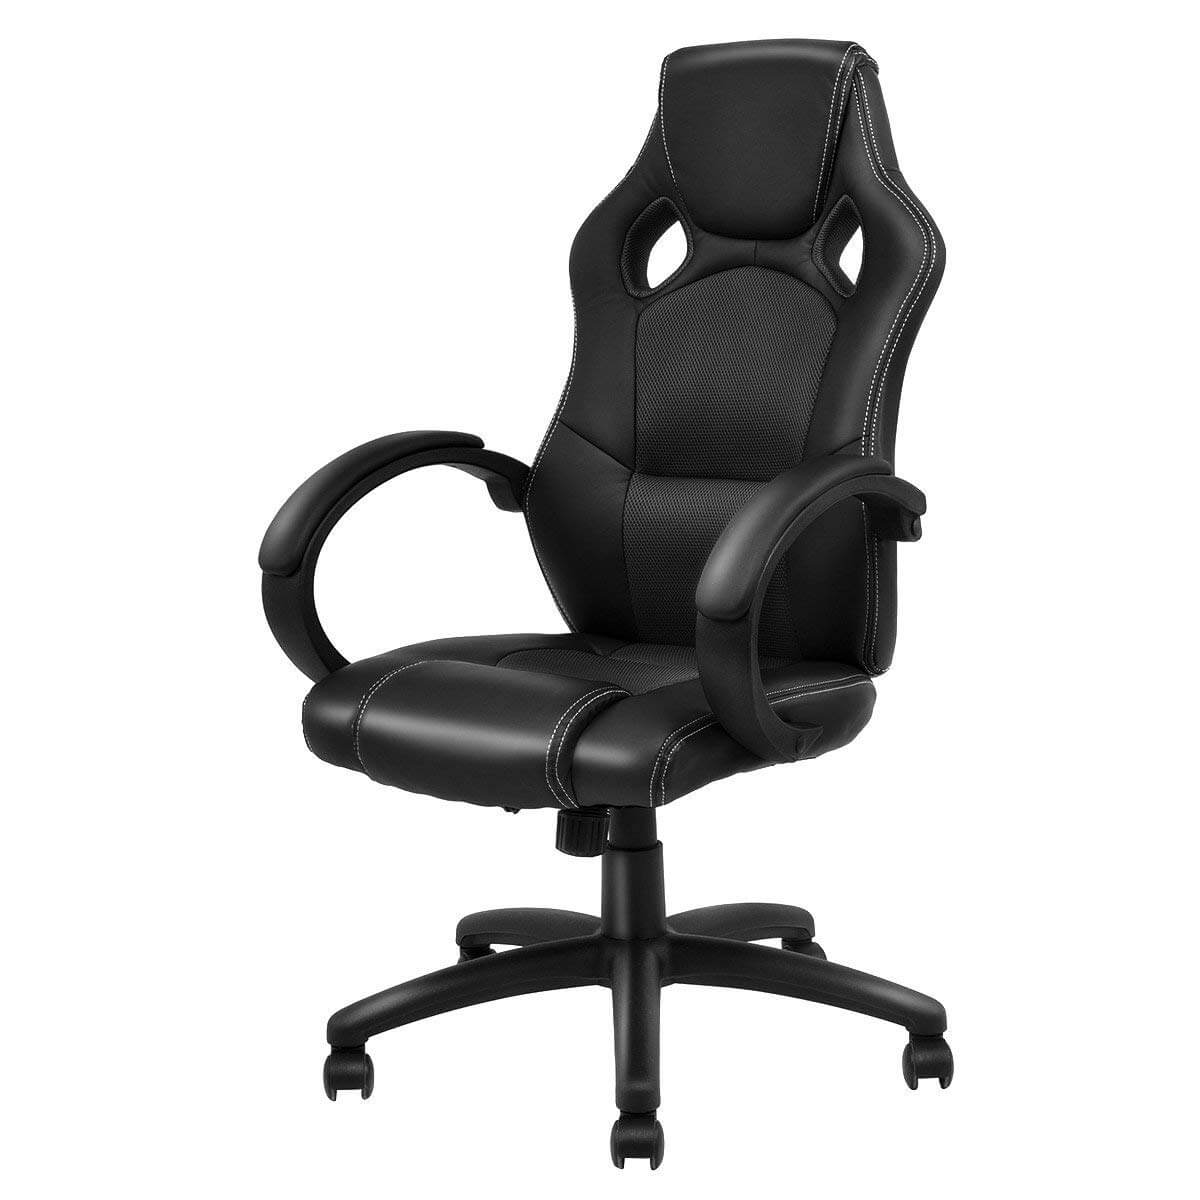 10 Best Gaming Chairs Under 100 USD (100 Quality) 2021